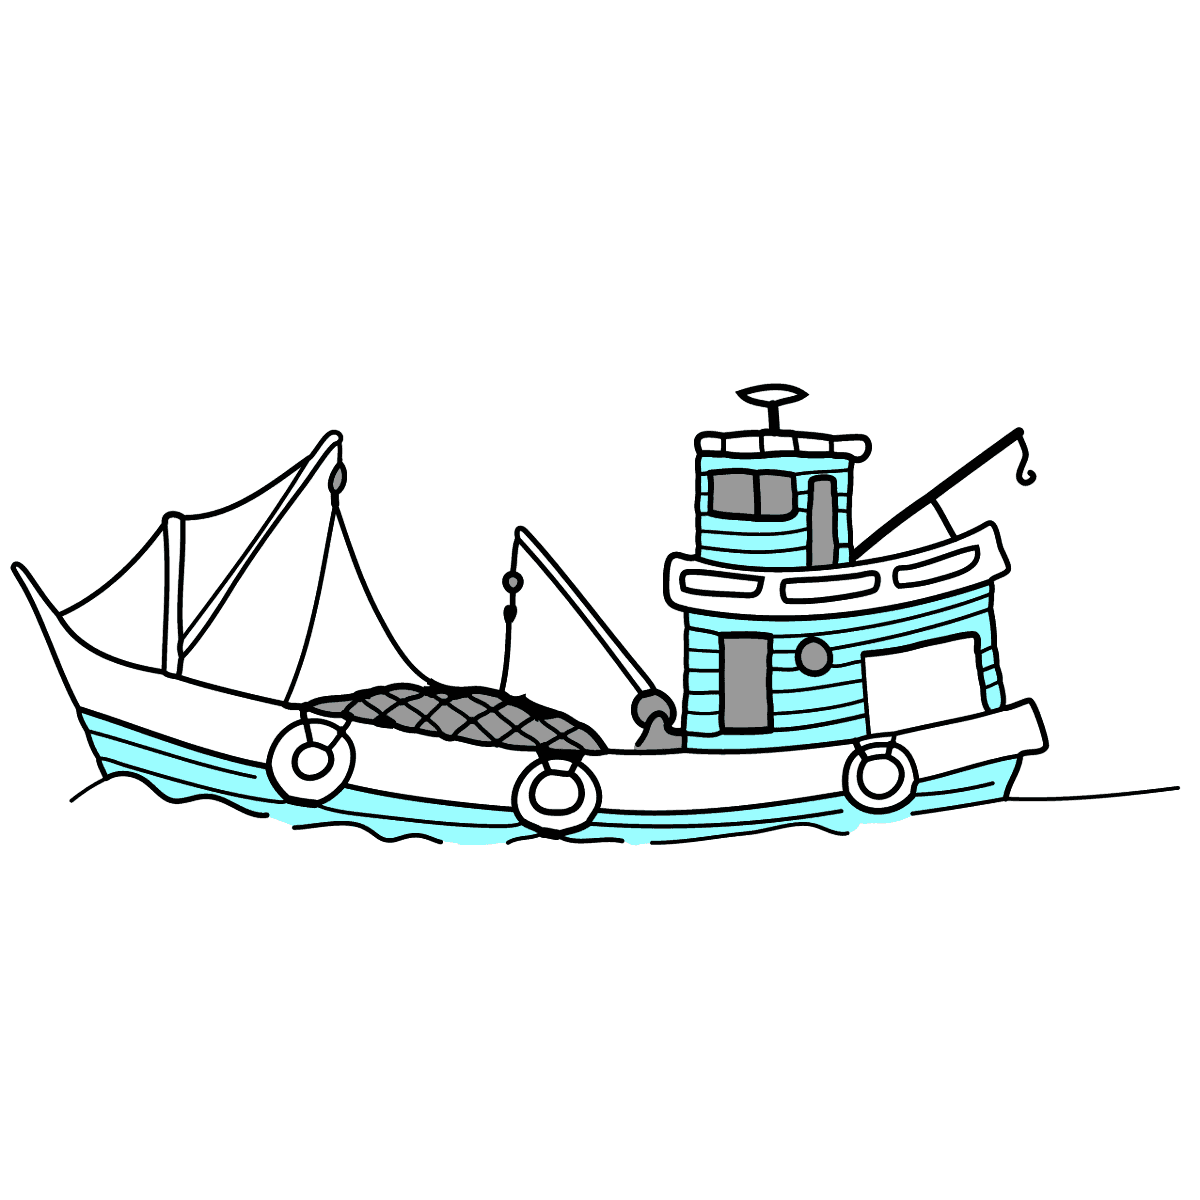 NEW COLORING PAGE